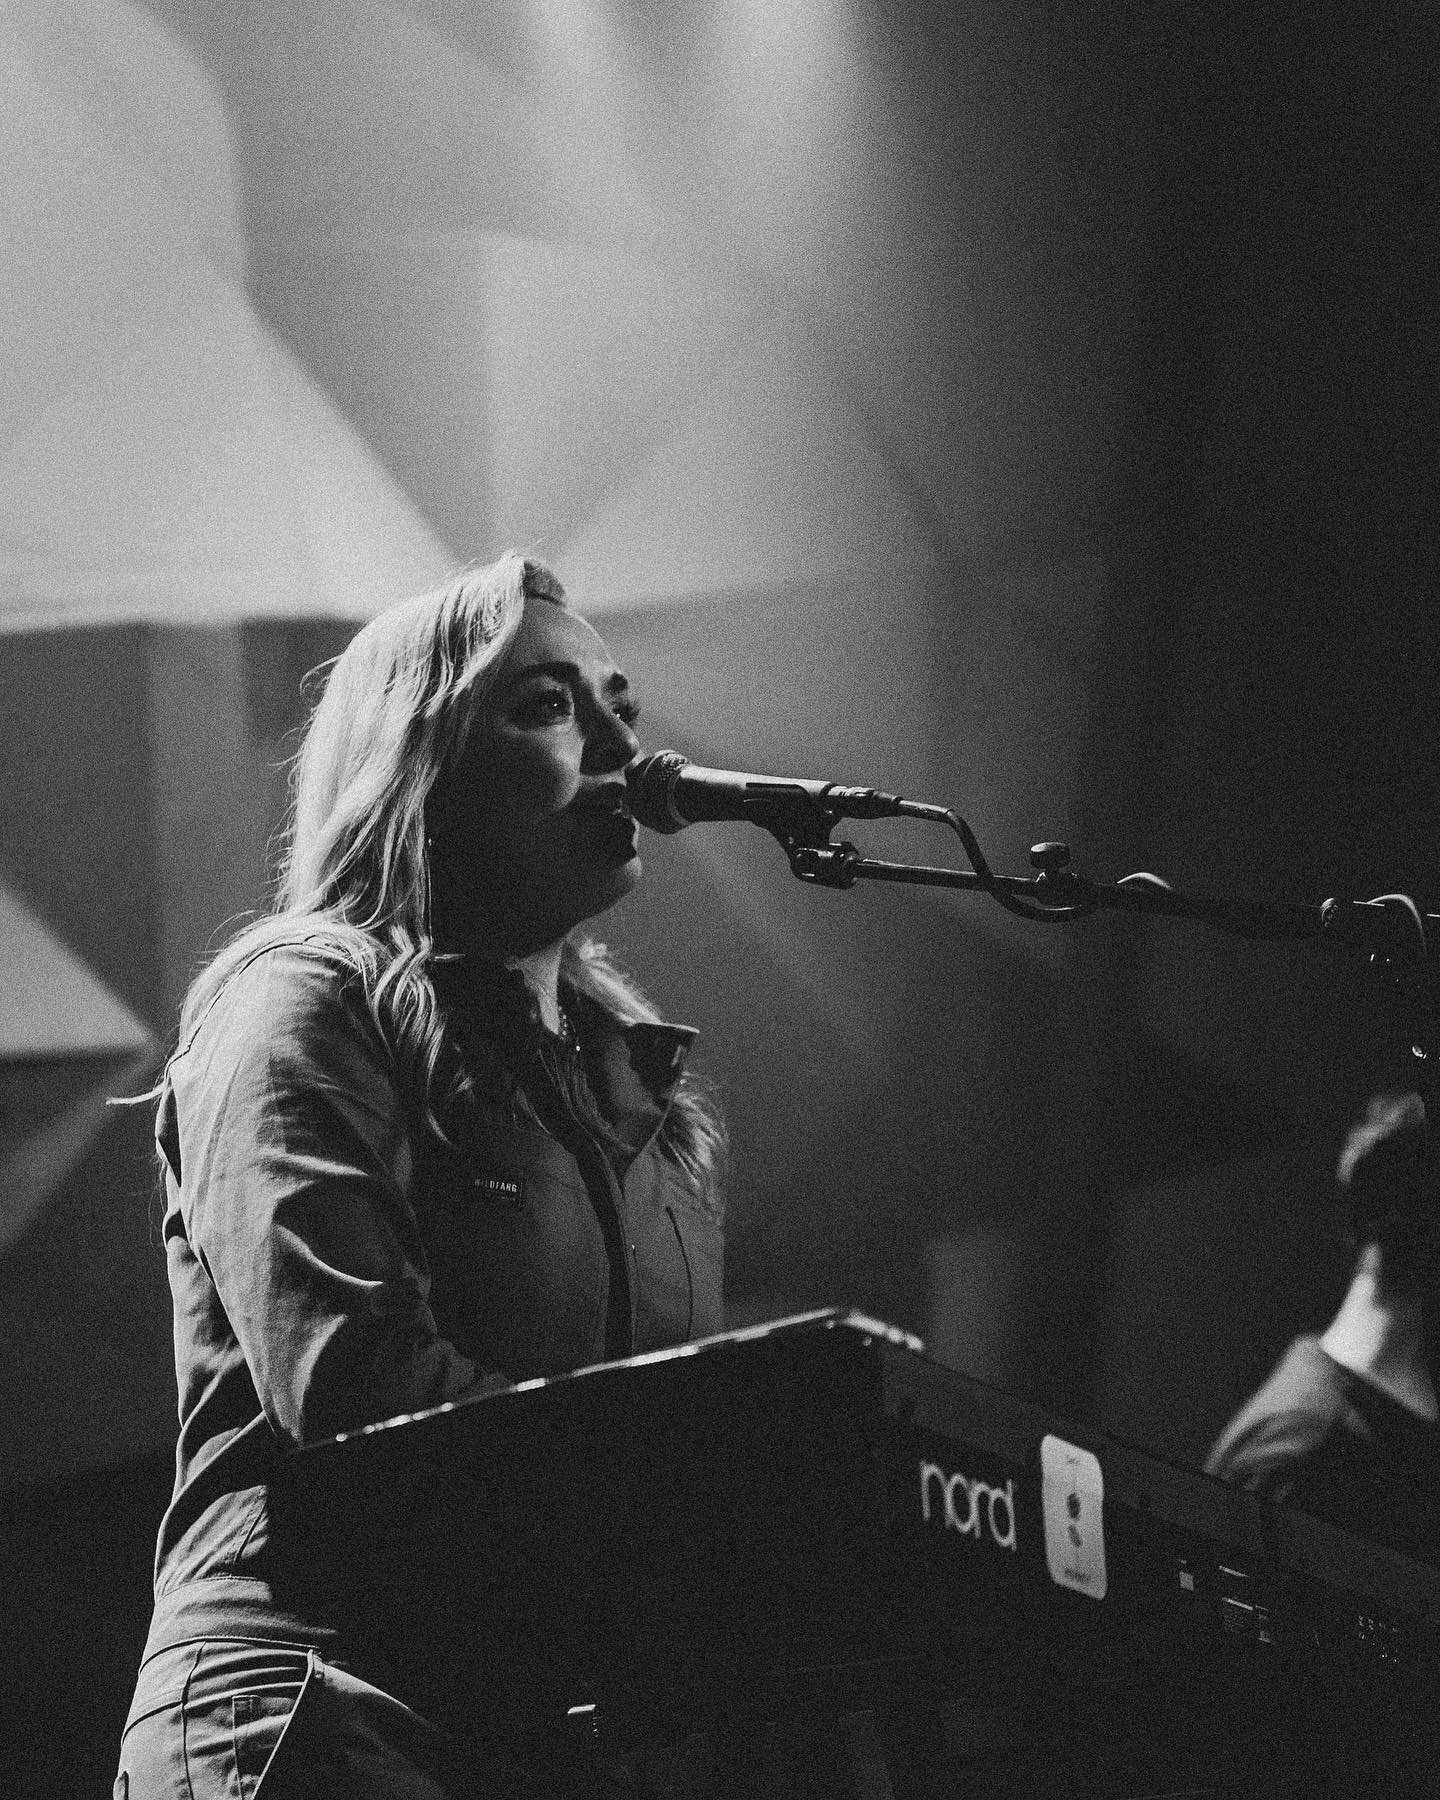 Some great B &amp; W shots by @lchtnbrg.co from @holoceneportland 
1.25.2023